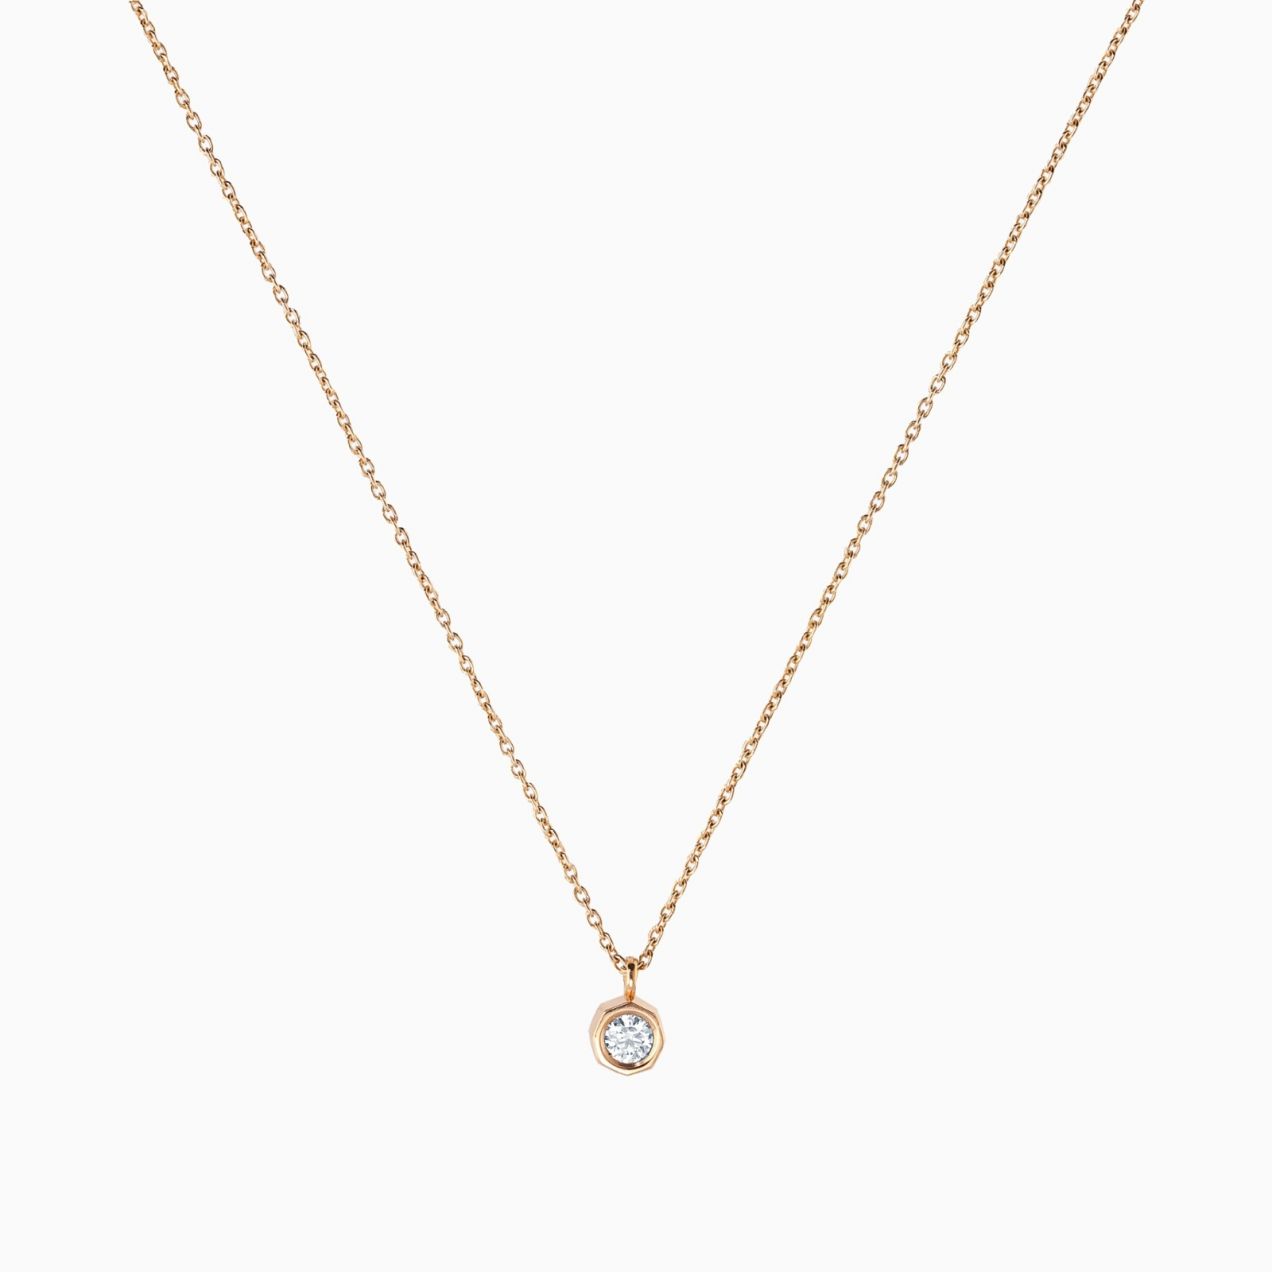 Rose gold solitaire pendant with diamond